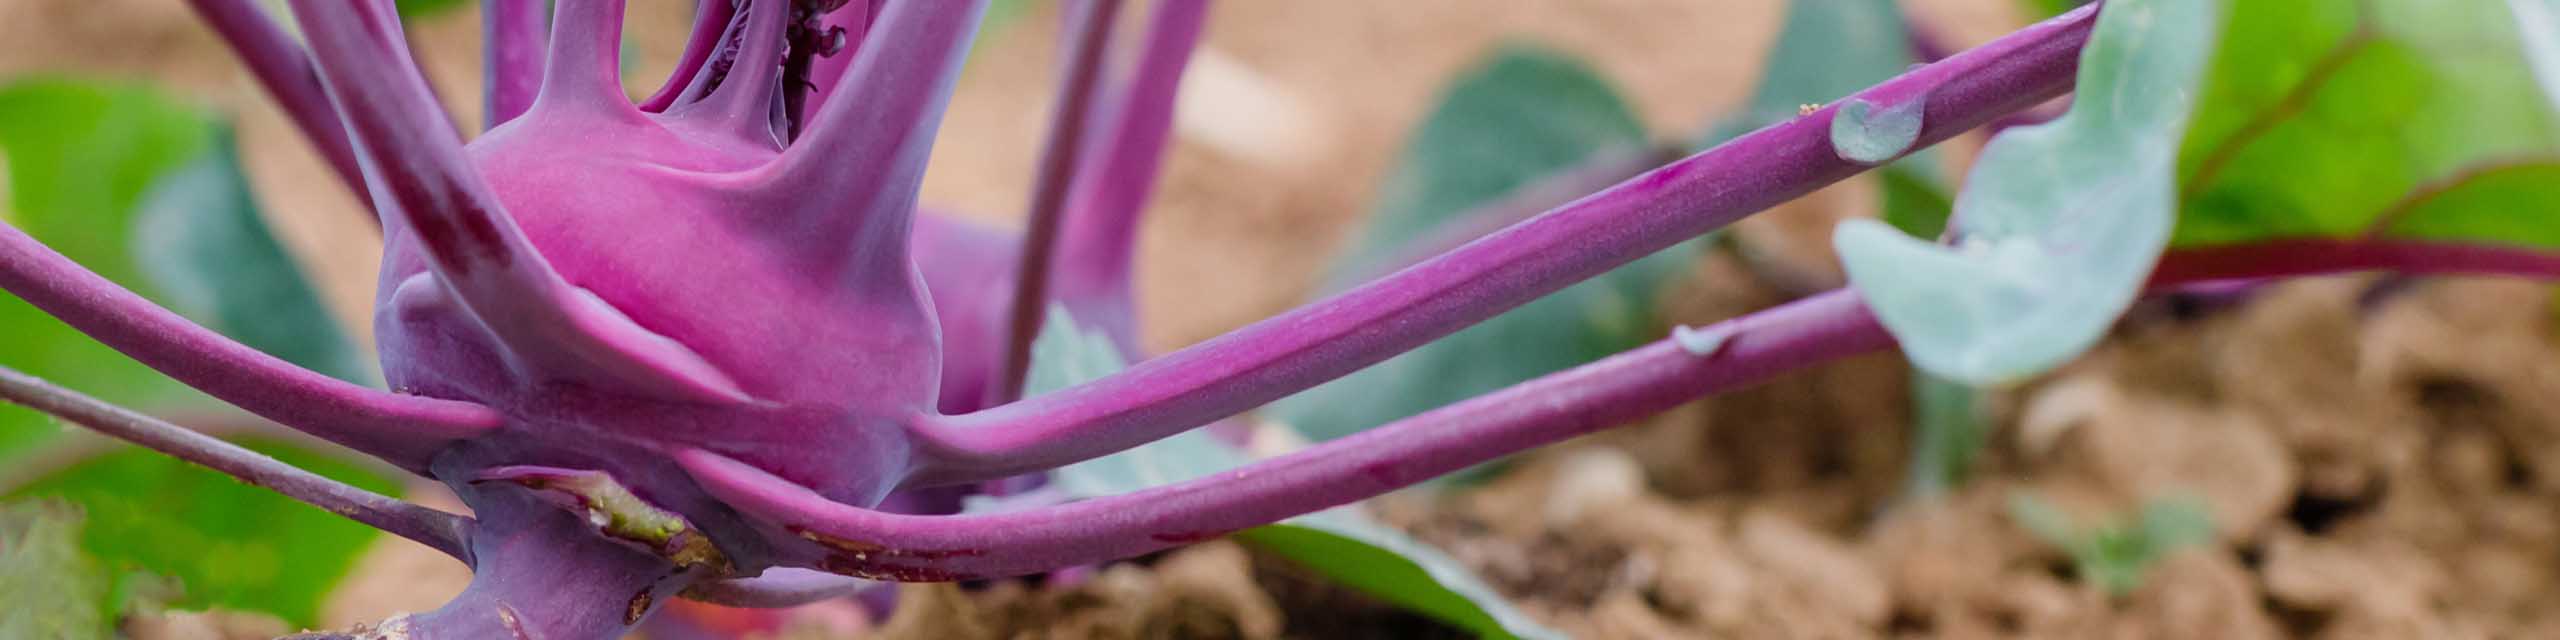 Close up of a purple kohlrabi plant growing in a garden.